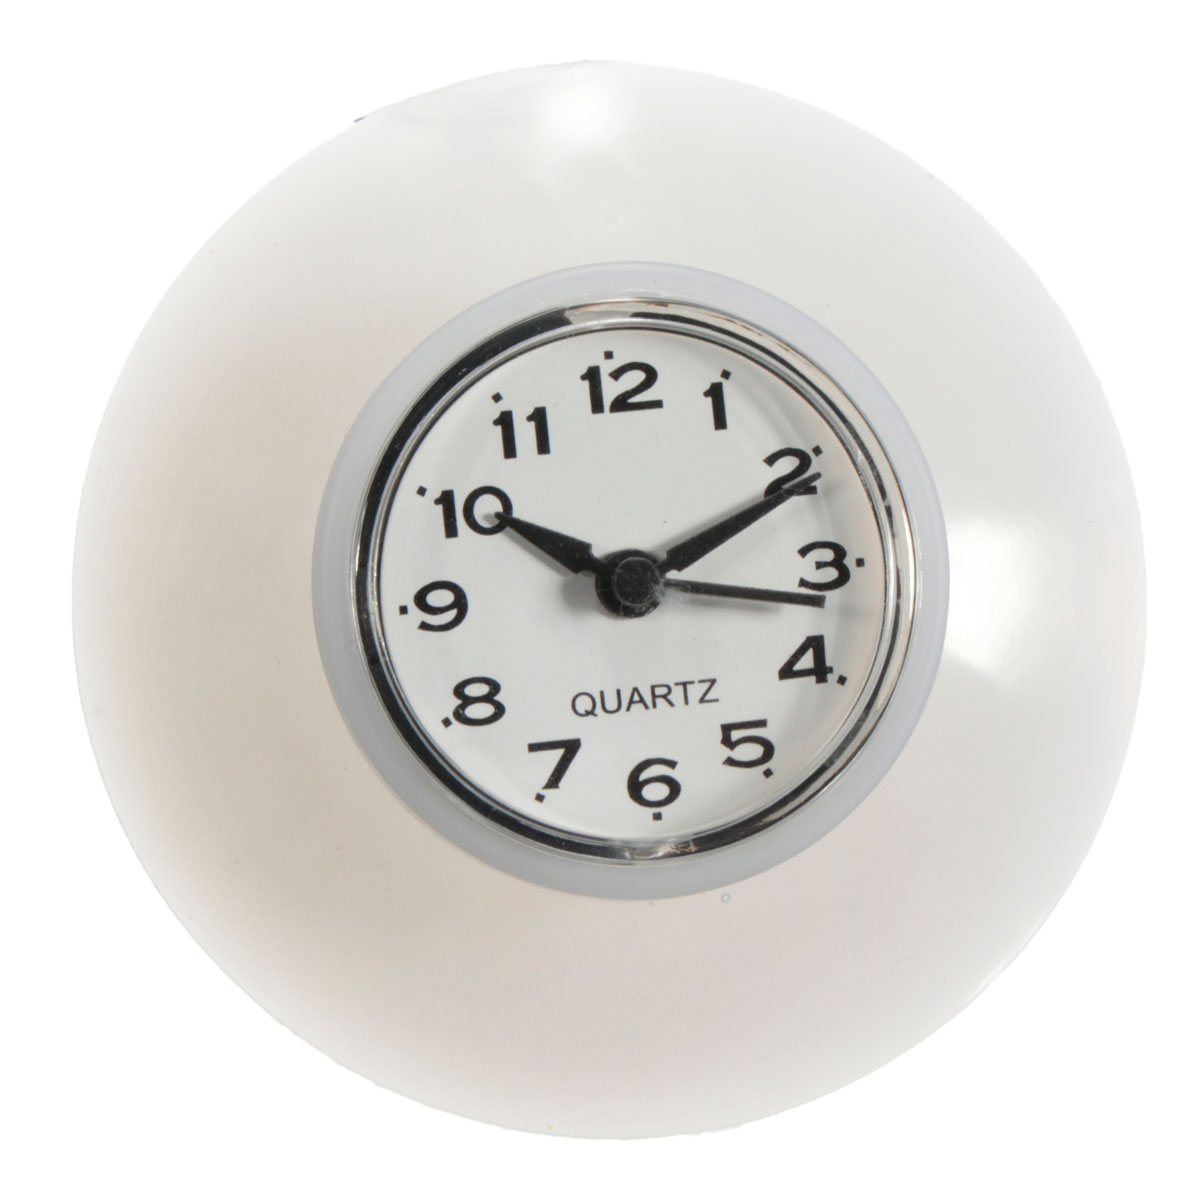 Bathroom Kitchen Waterproof Wall Clock Resistant Timer Suction Cup